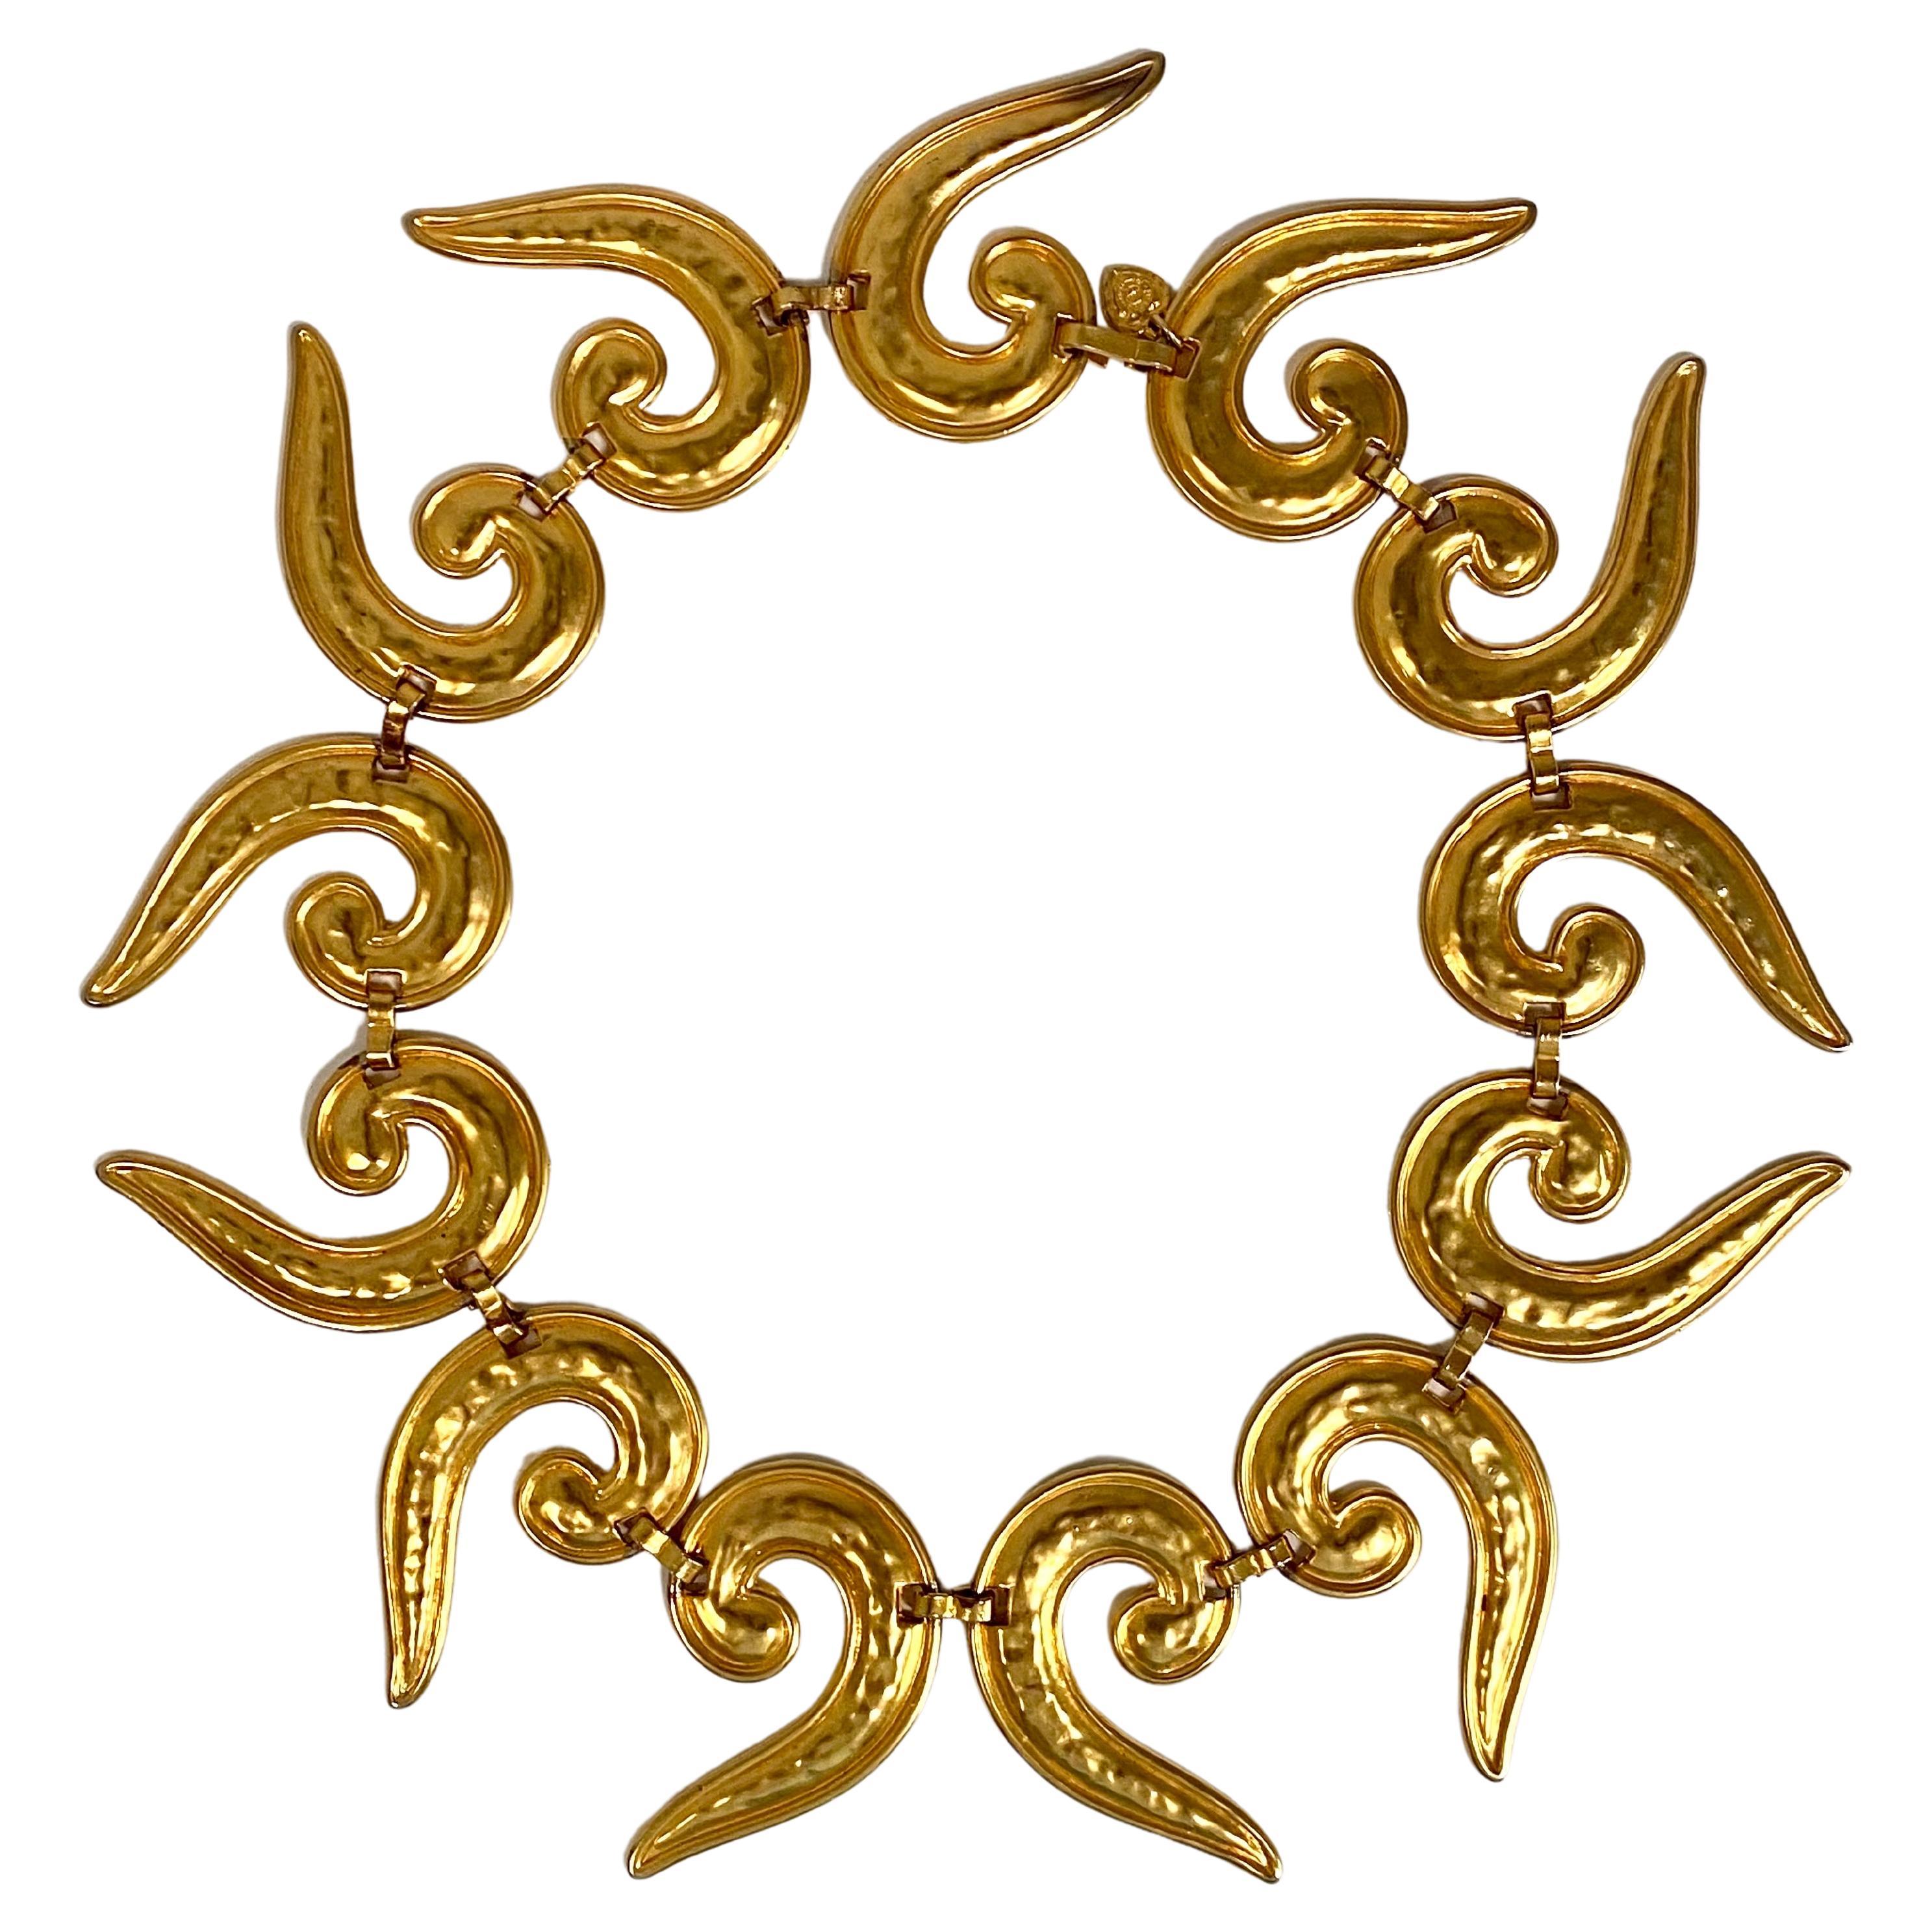 Edward Rambaud large link gold tone collar in the Etruscan style from the 1980s. Large C scroll shape links measuring 1.5 inches wide and 2.5 inches are joined together with a small figure 8 shape link to form the 22 inch long necklace. The necklace